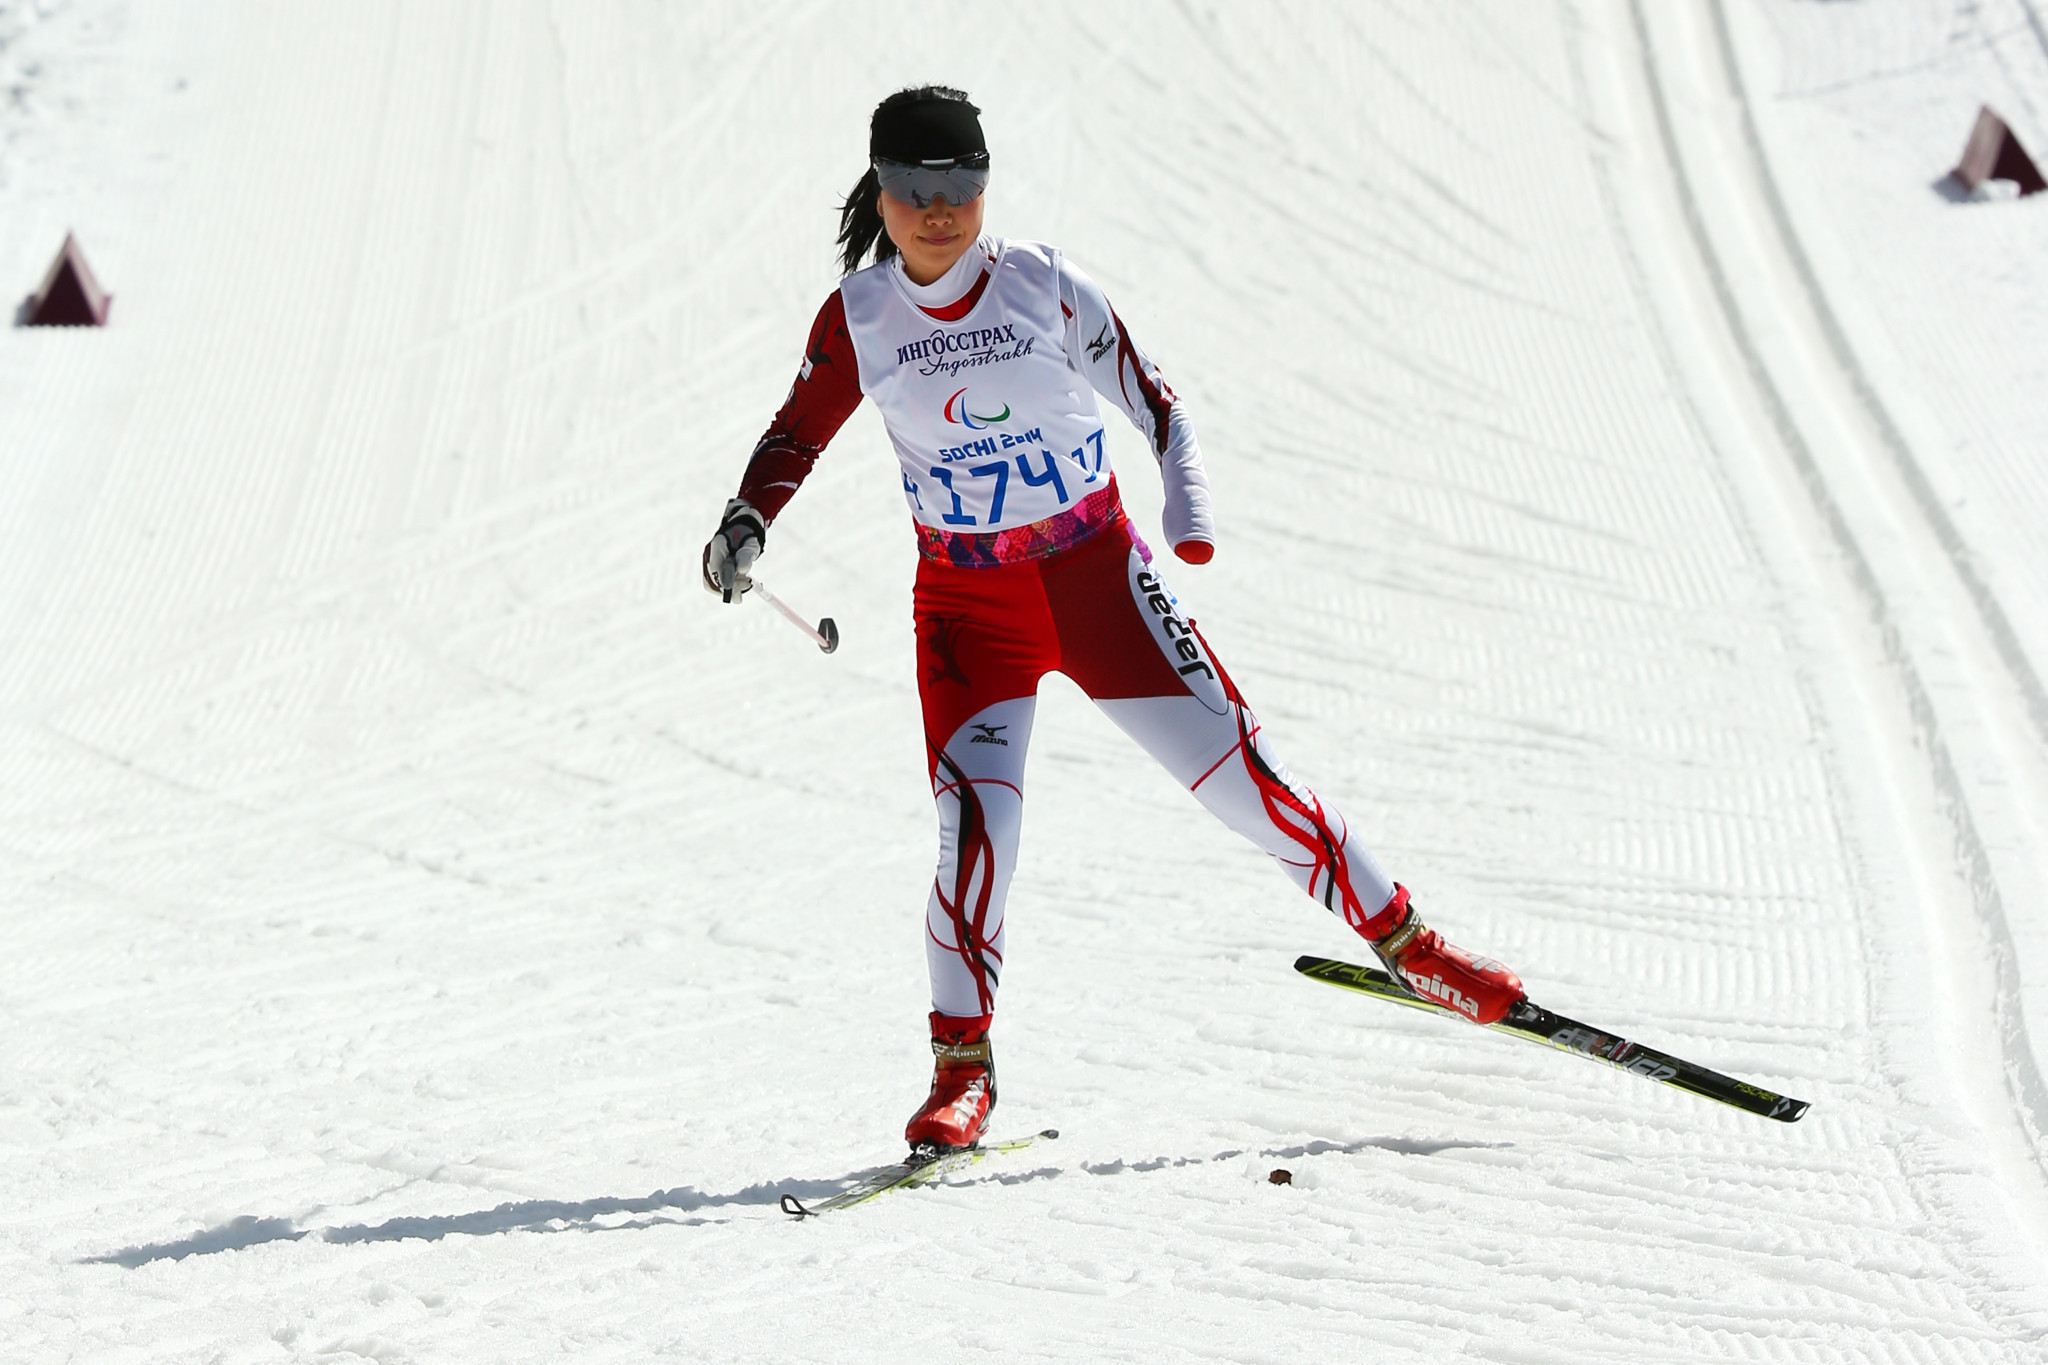 Shoko Ota is a two-time Paralympic medallist on skis ©Getty Images